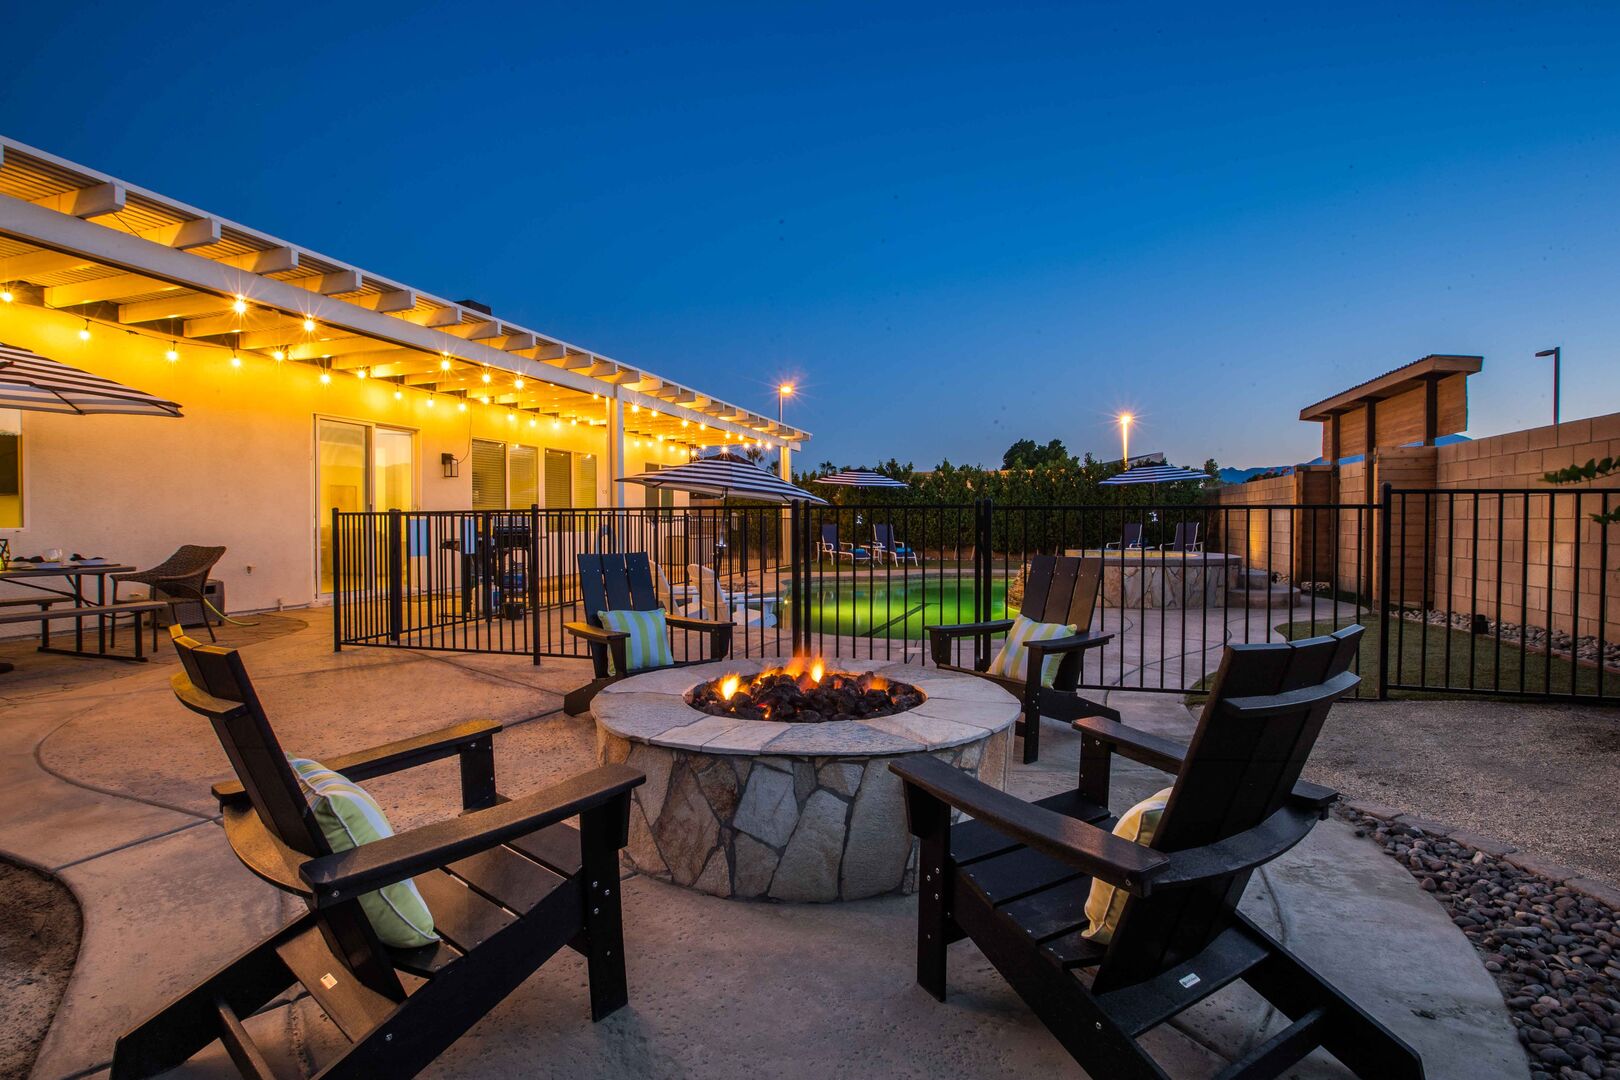 Gather around and tell your most memorable stories around the natural gas fire pit.